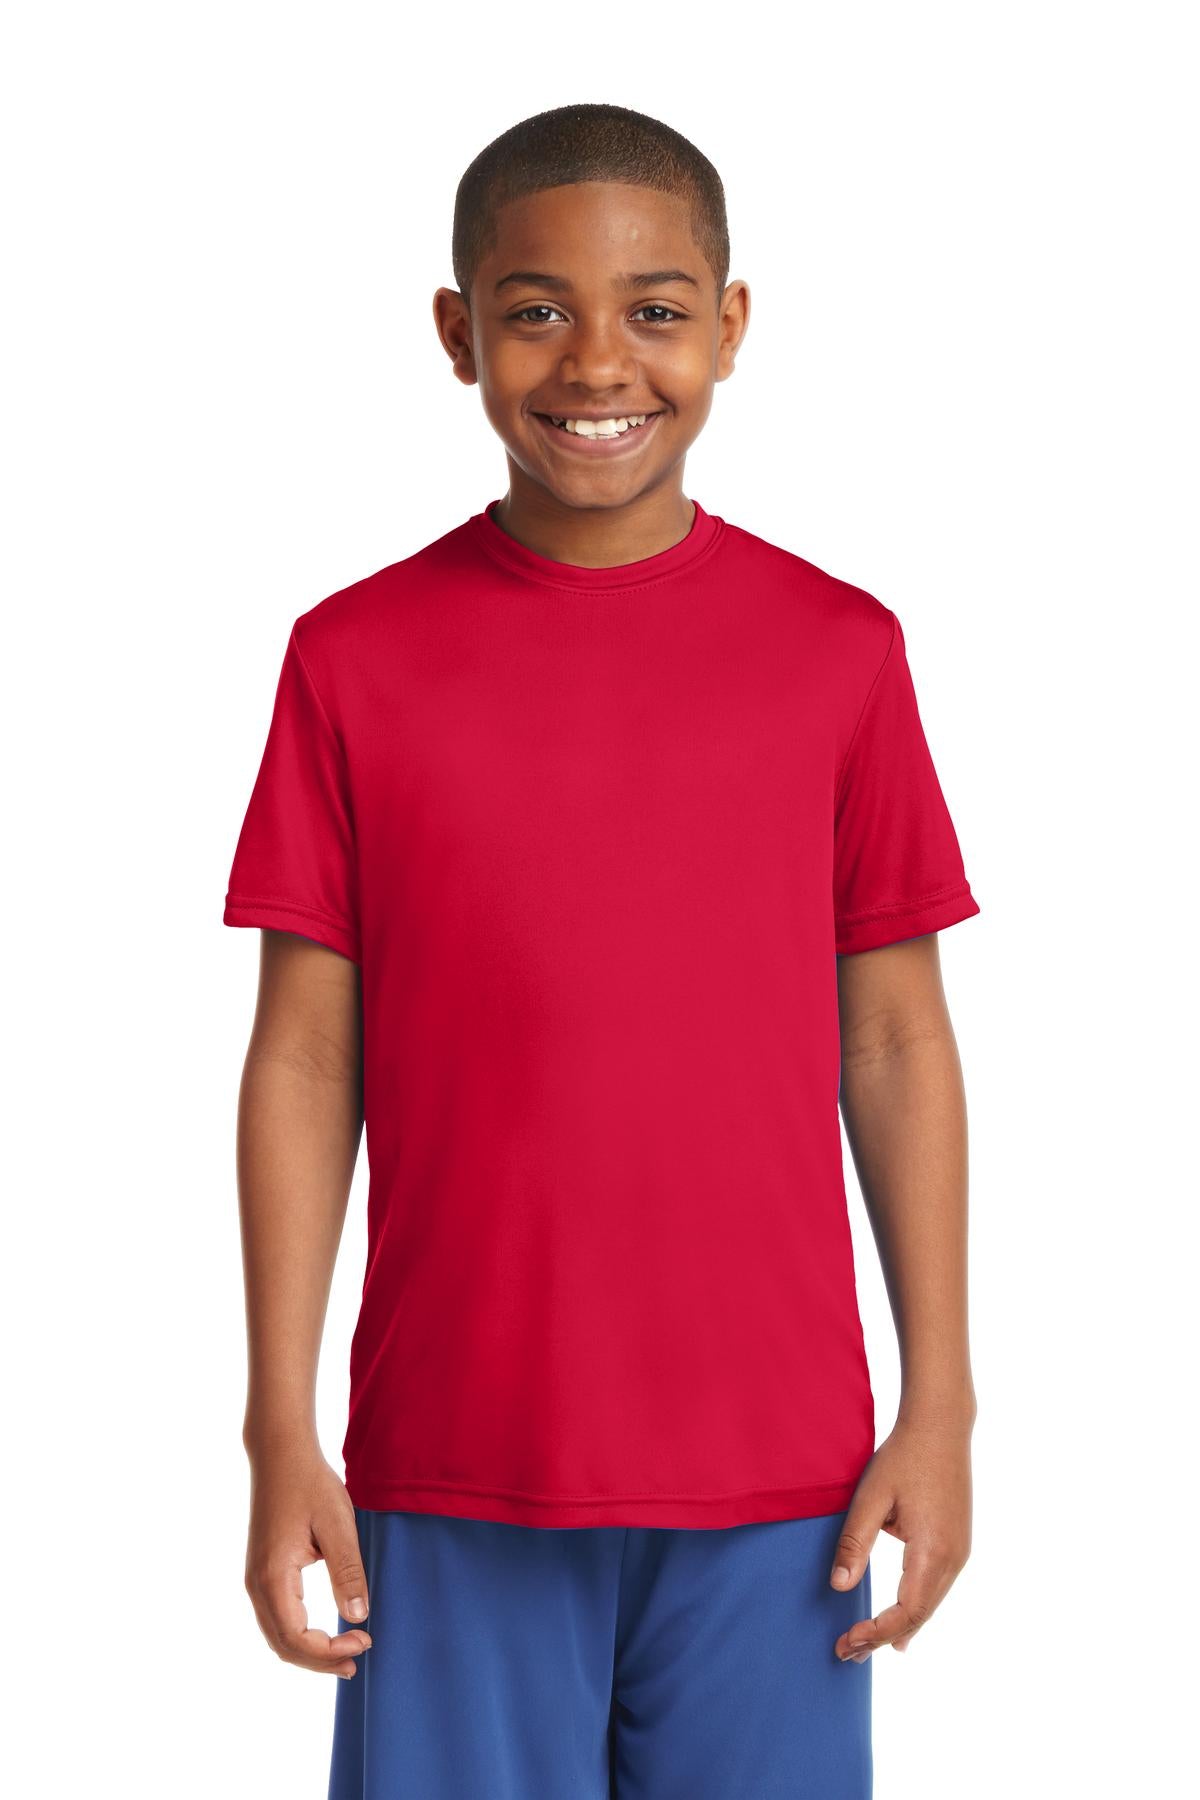 Next LevelSport-Tek® Youth PosiCharge® Competitor™ Tee. YST350